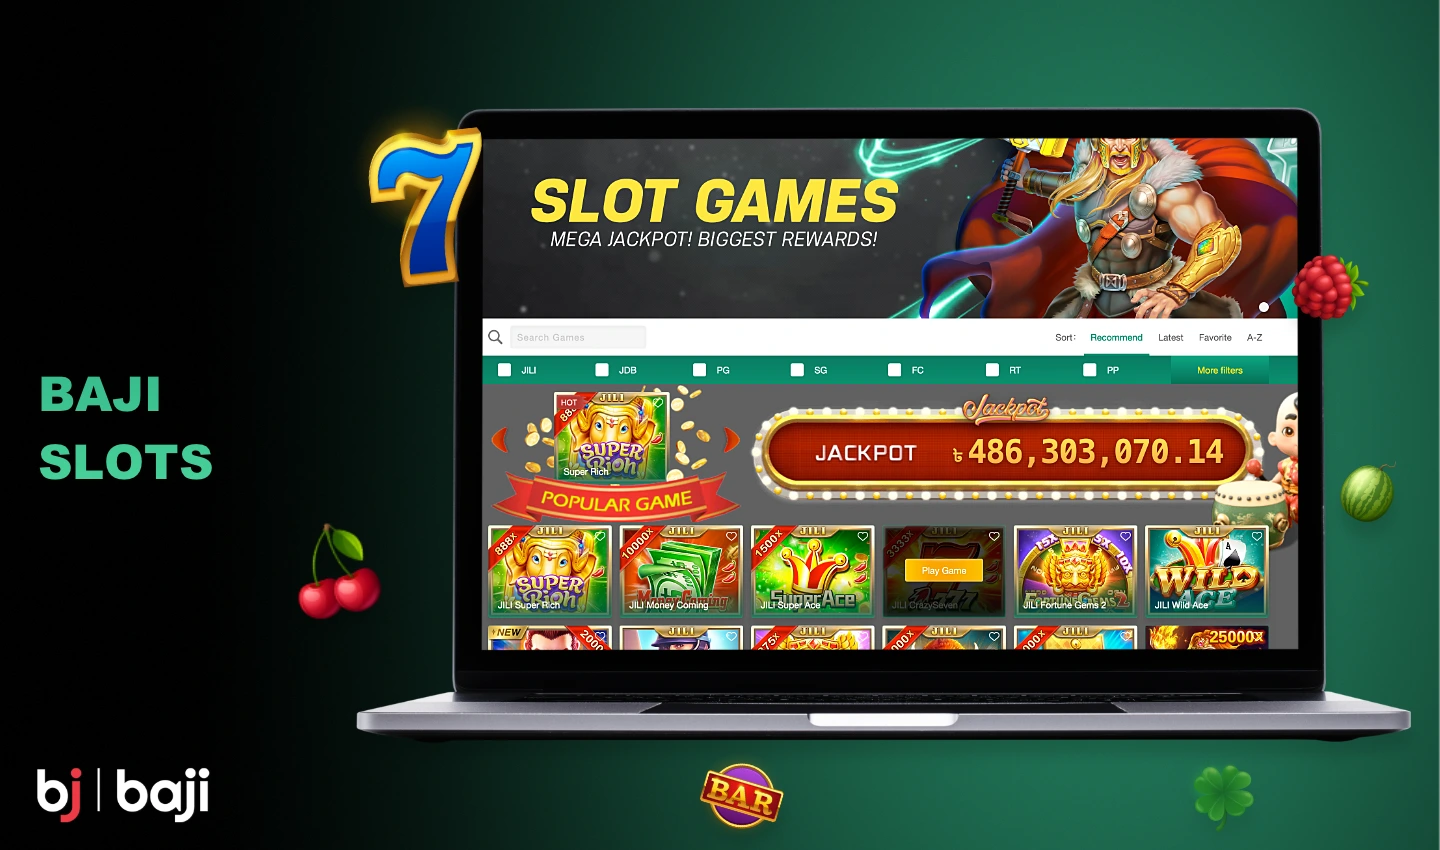 At Baji Casino, users have access to hundreds of exciting slot machines from top software providers